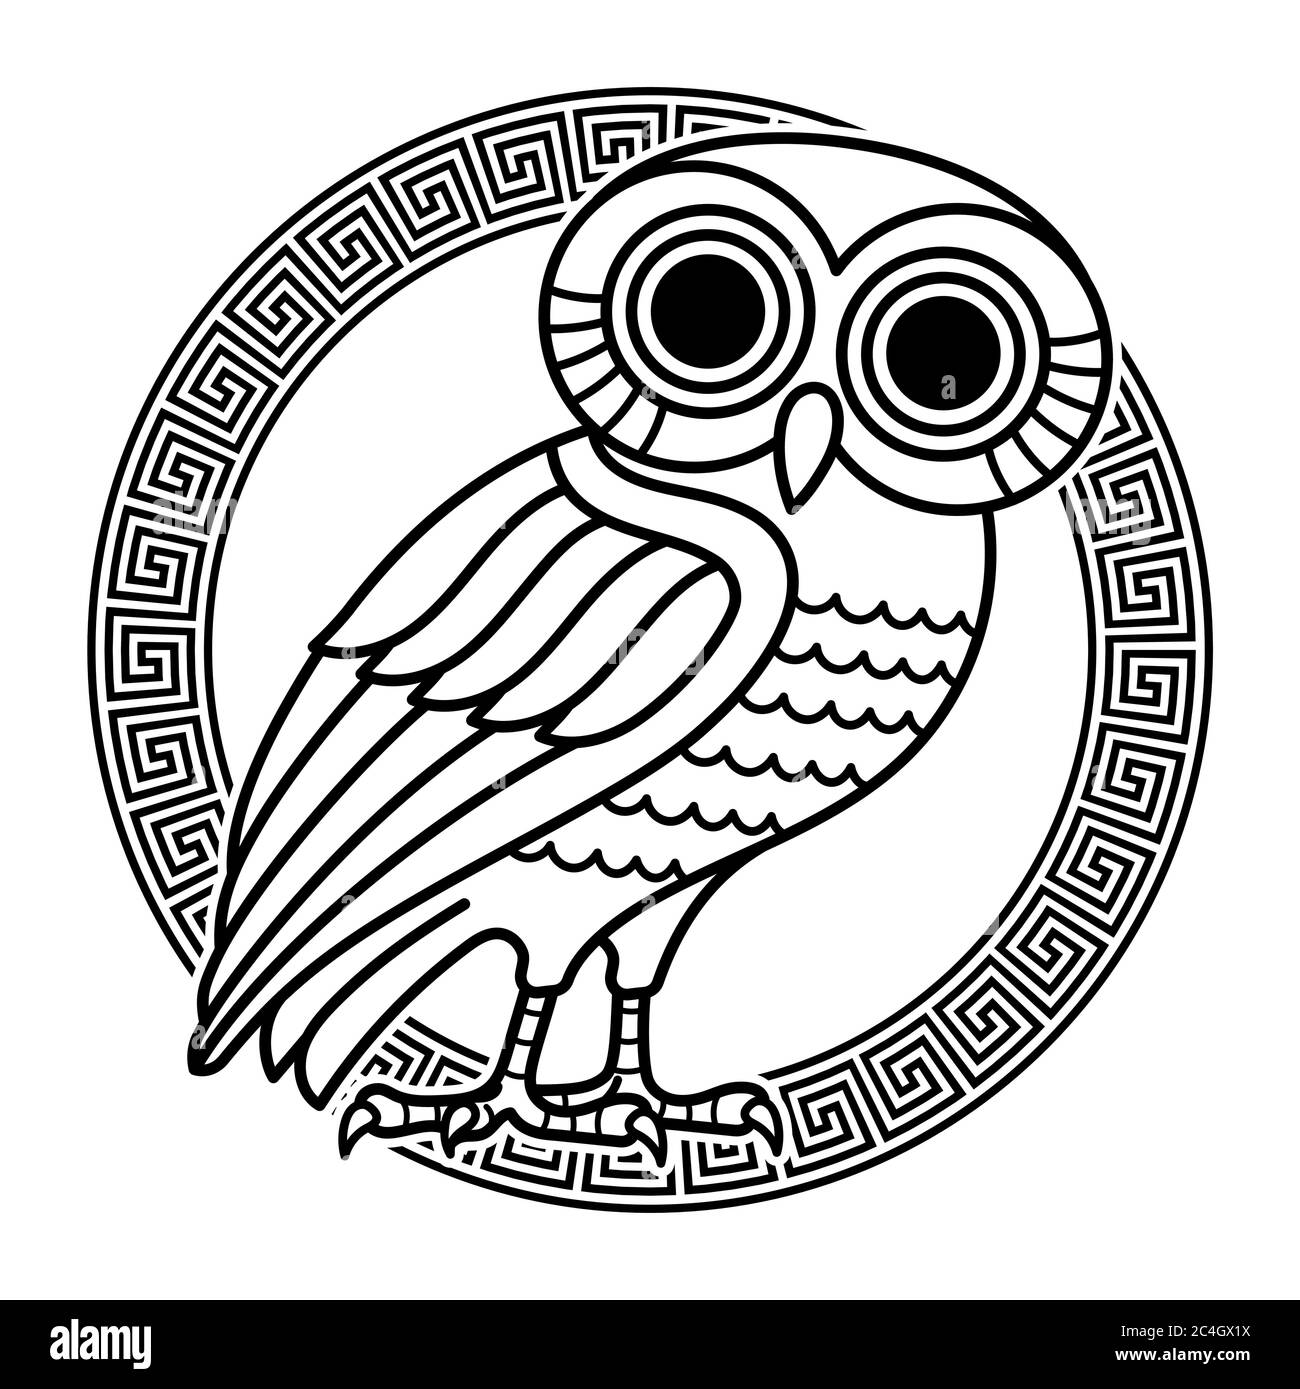 Greek ancient coin from Athens, vintage illustration. Old engraved illustration of an owl and greek ornament meander Stock Vector